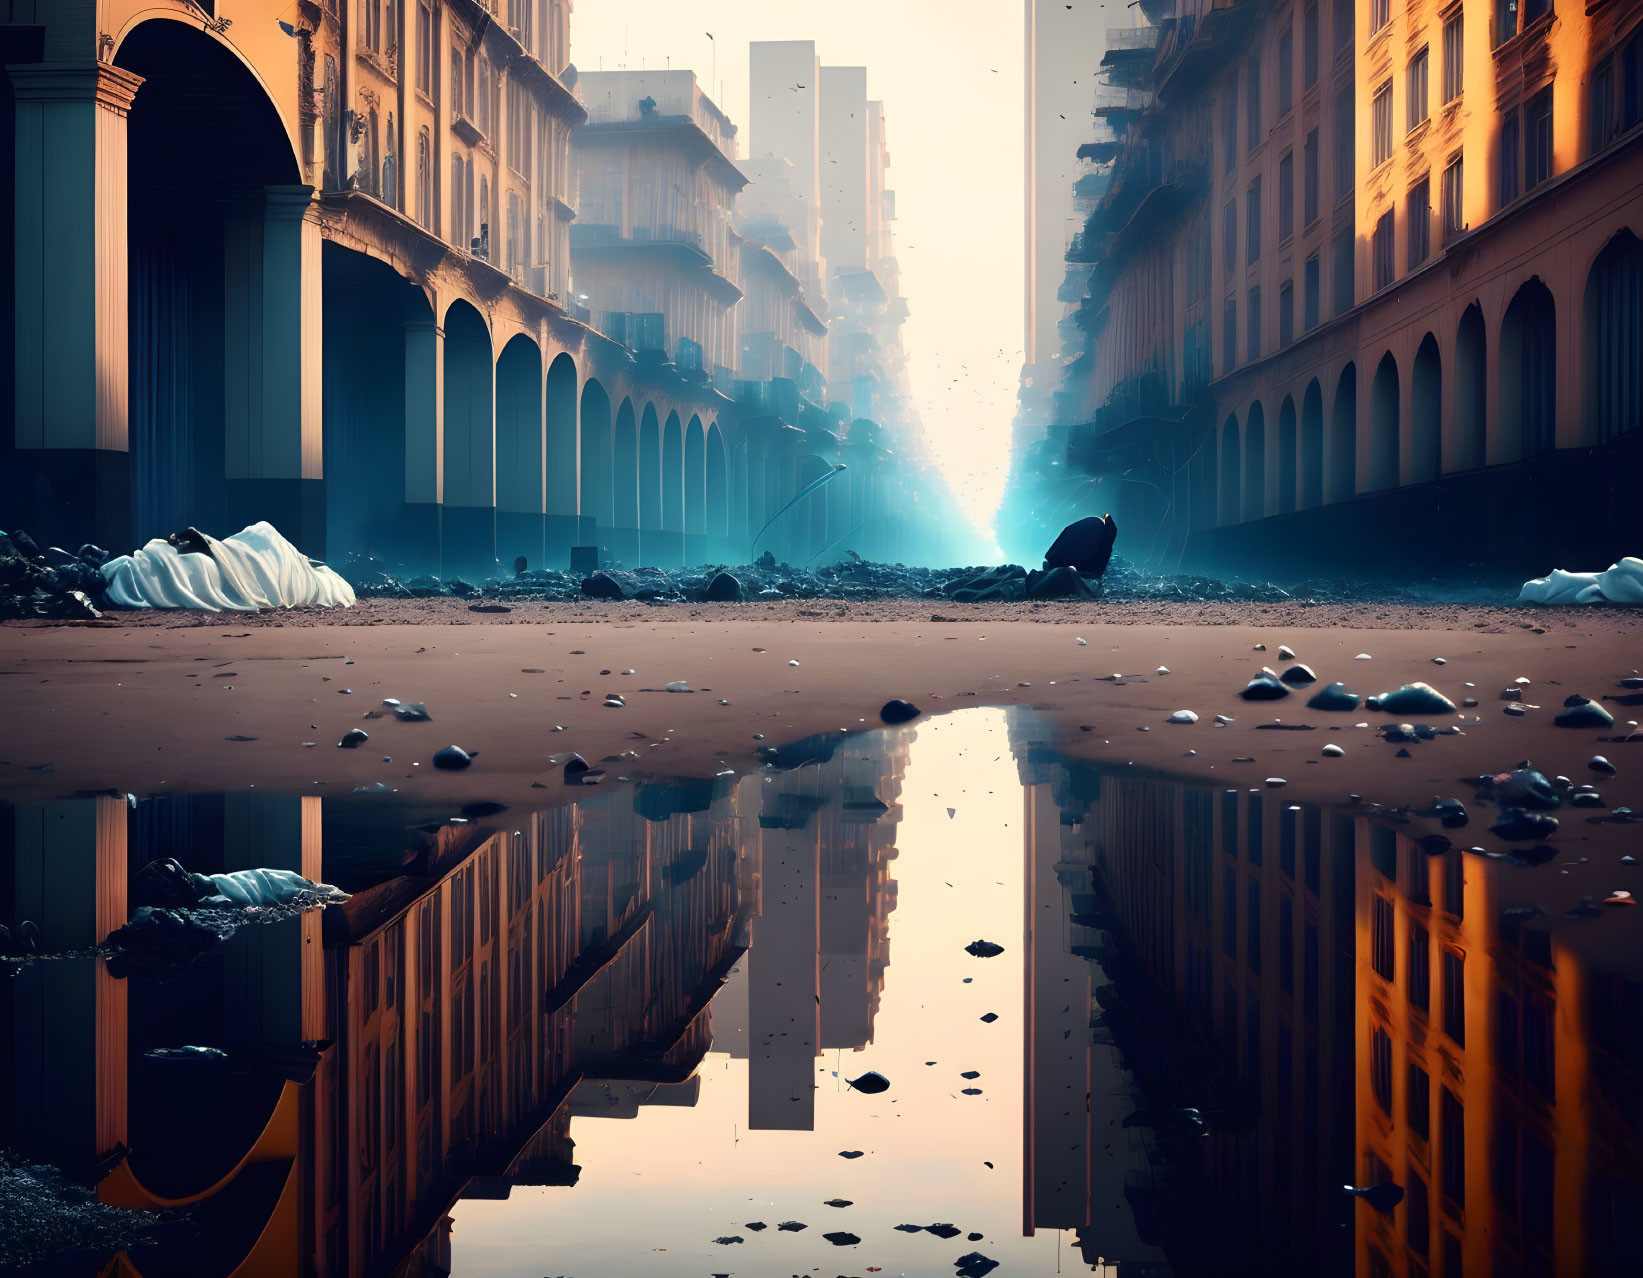 Derelict post-apocalyptic street scene with reflective puddle under orange-tinted sky